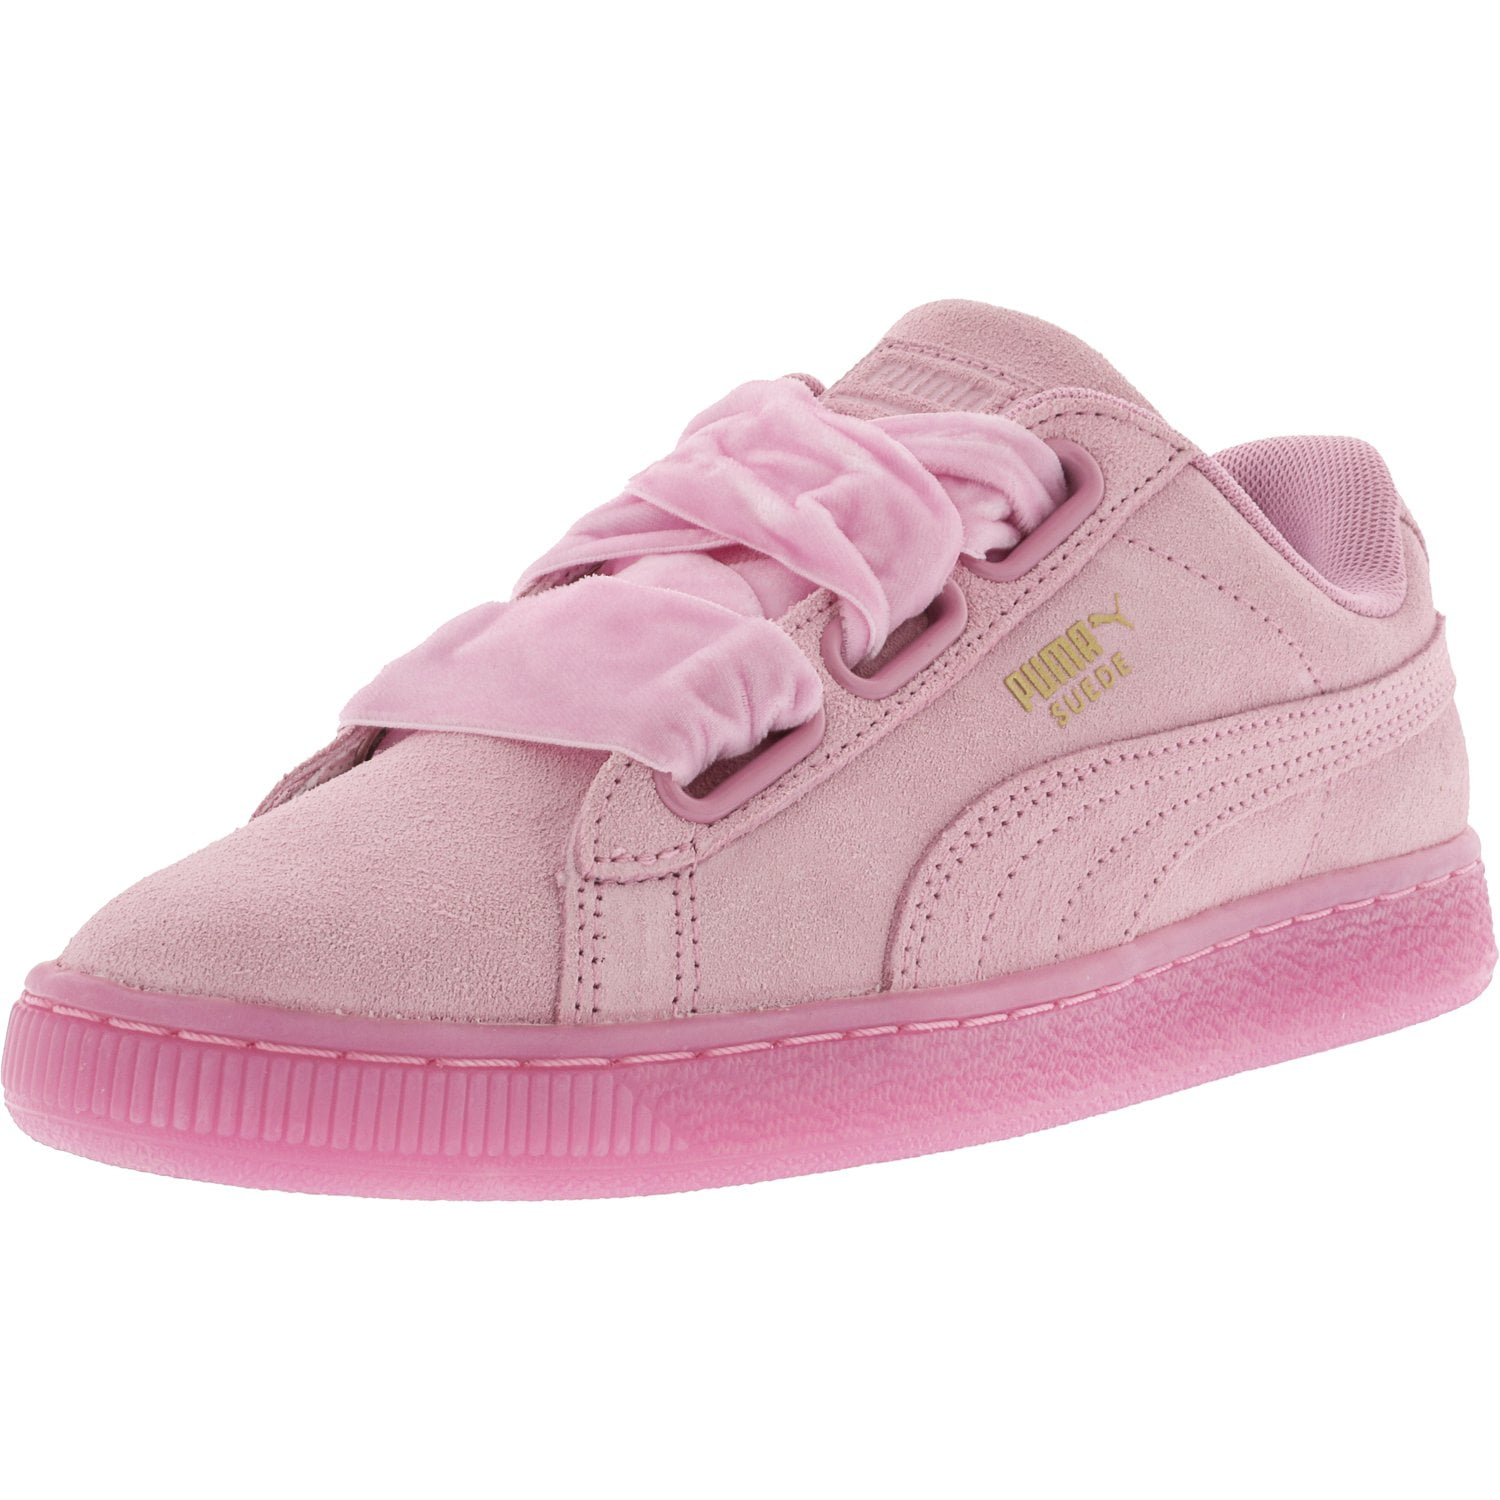 Puma Women's Heart Reset Suede Prism Pink / Ankle-High Fashion Sneaker -  7.5M